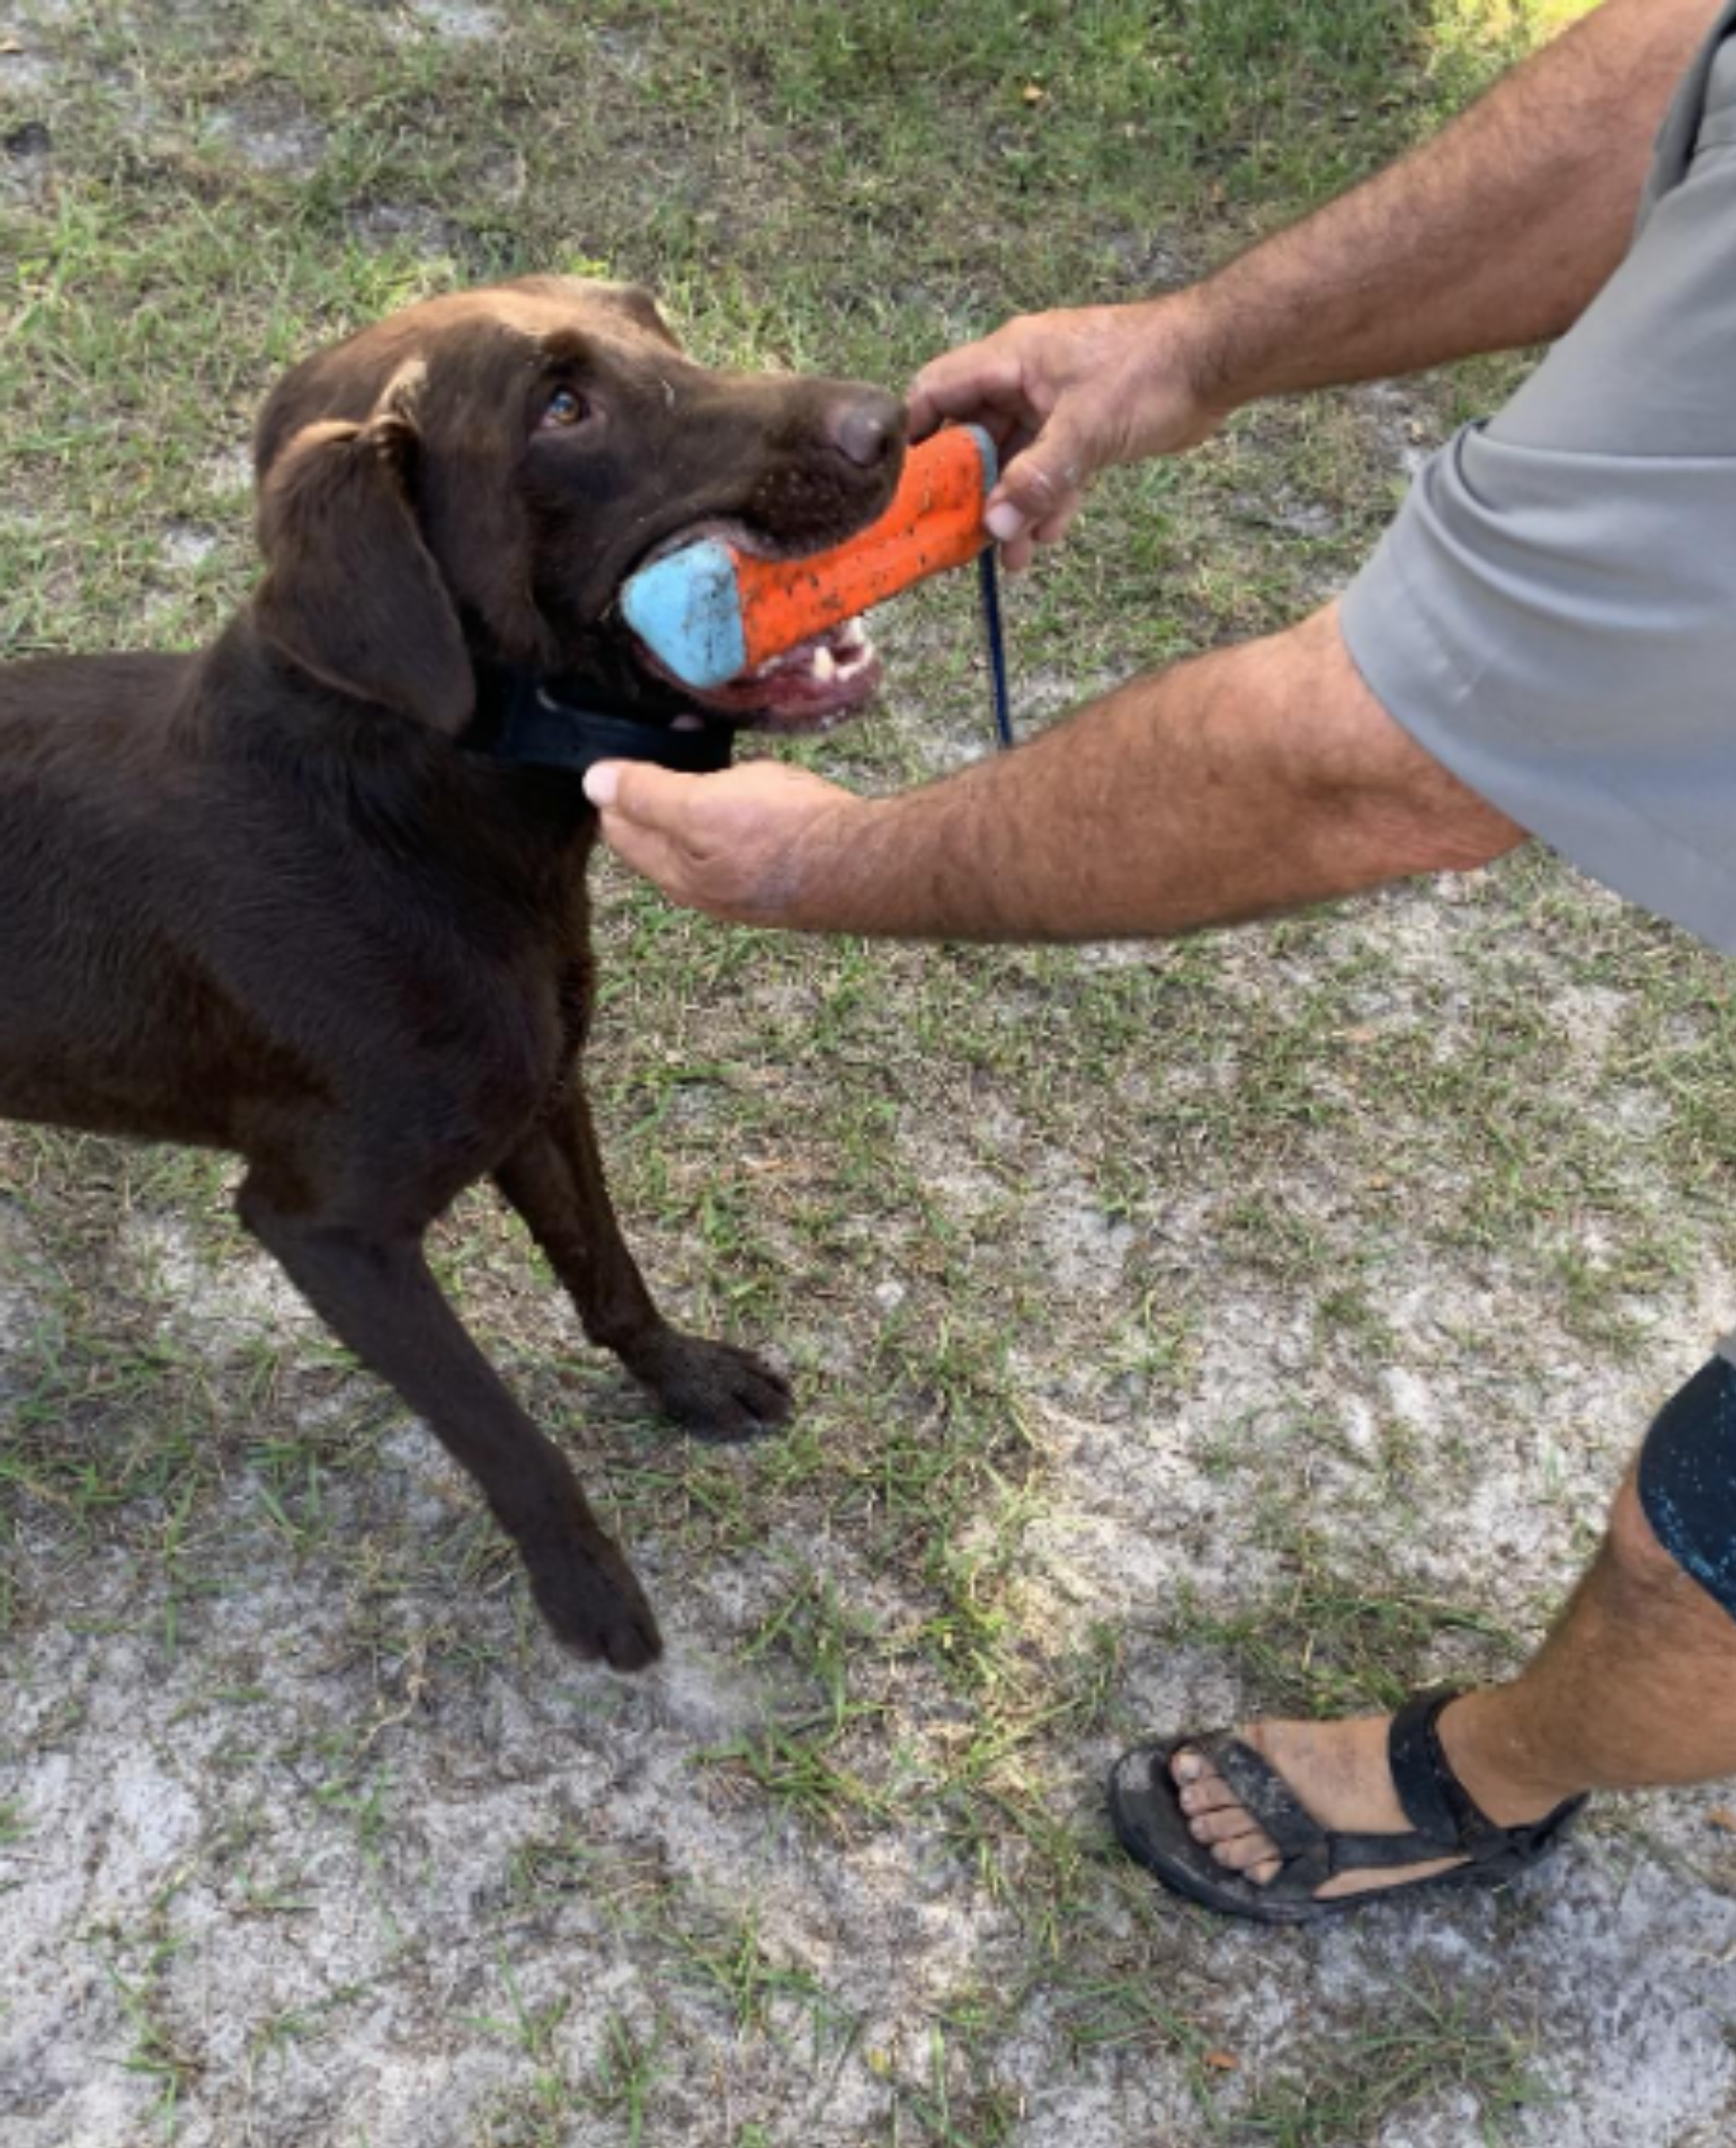 dog holding a toy while instructor helps